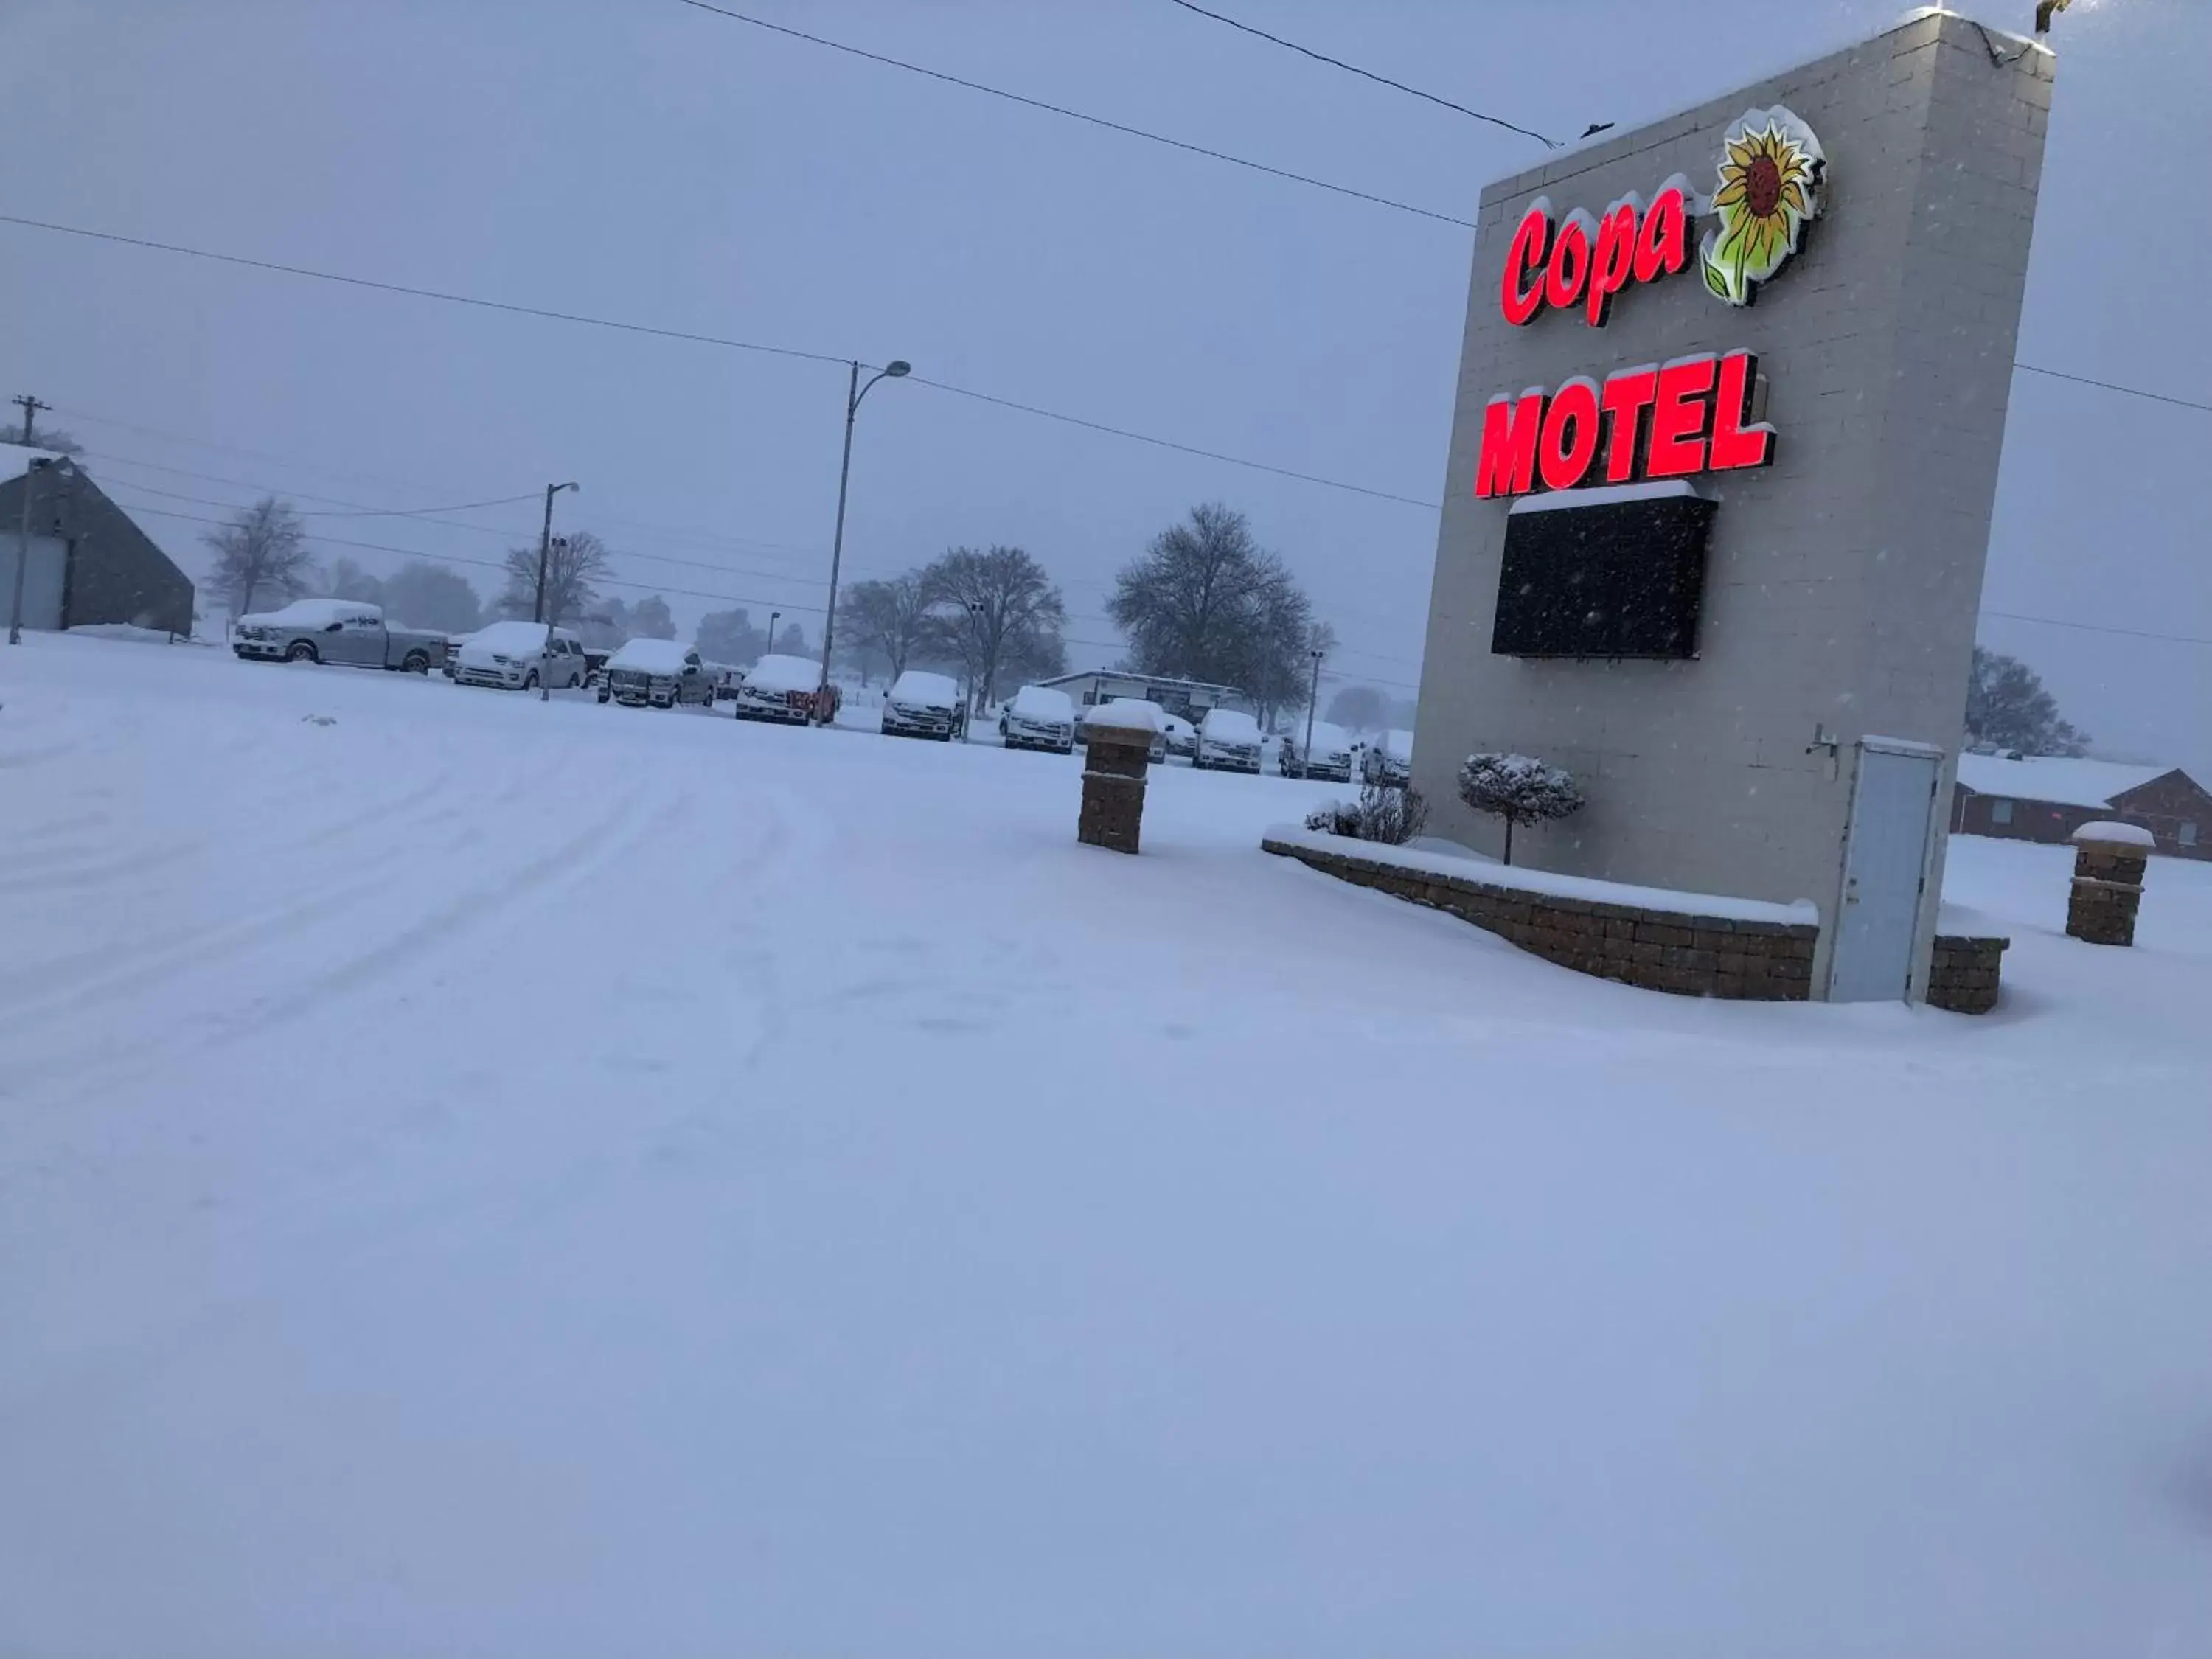 Property logo or sign, Winter in Copa Motel